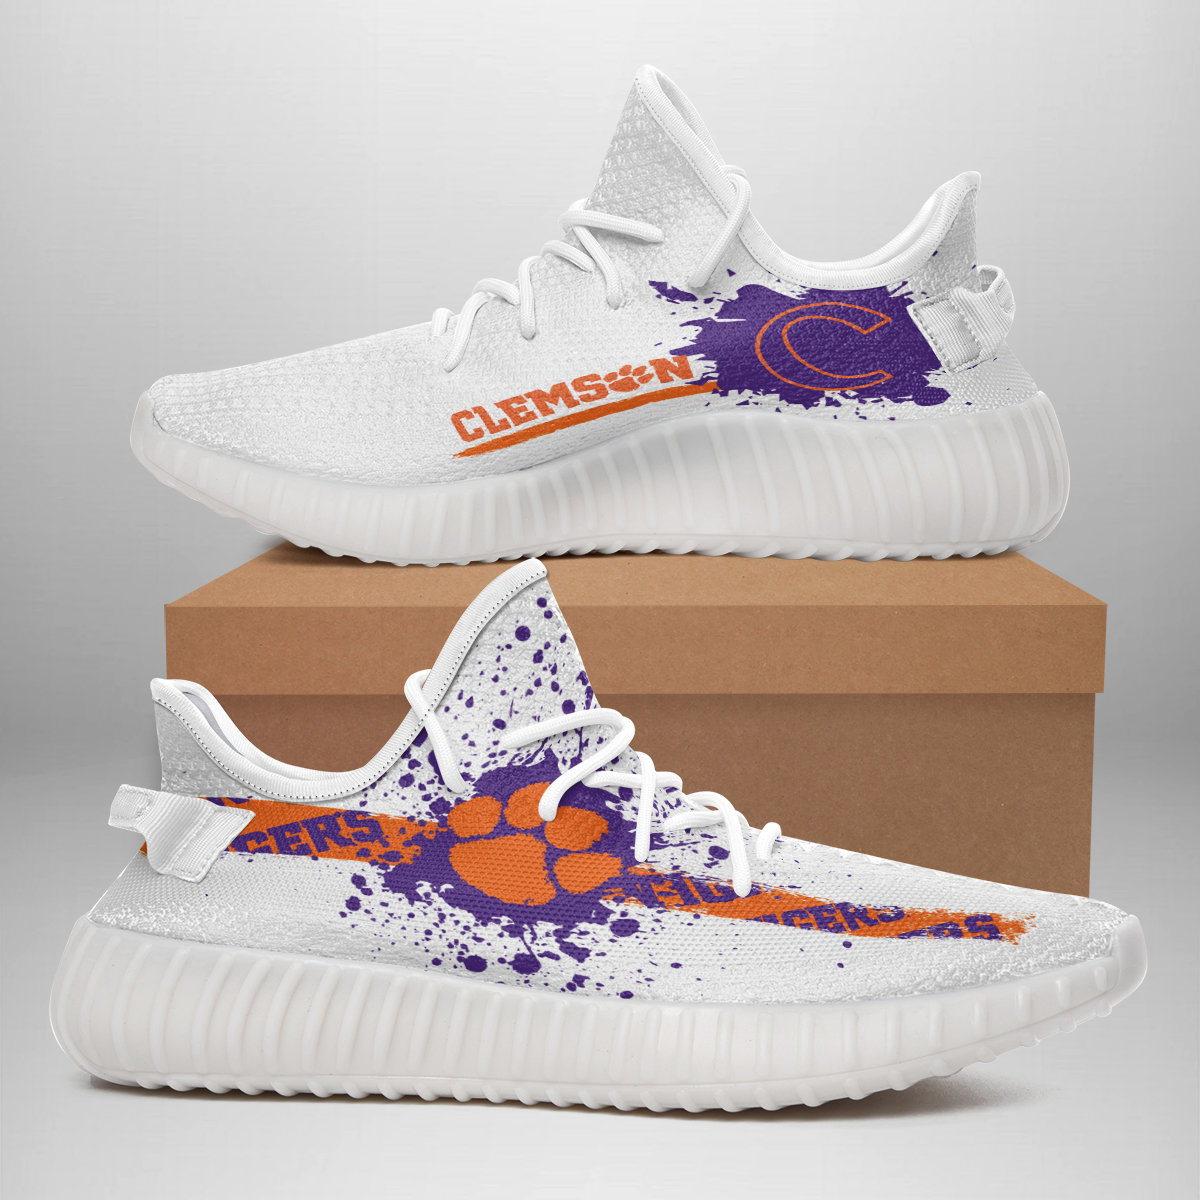 Clemson Tigers Yeezy Shoes